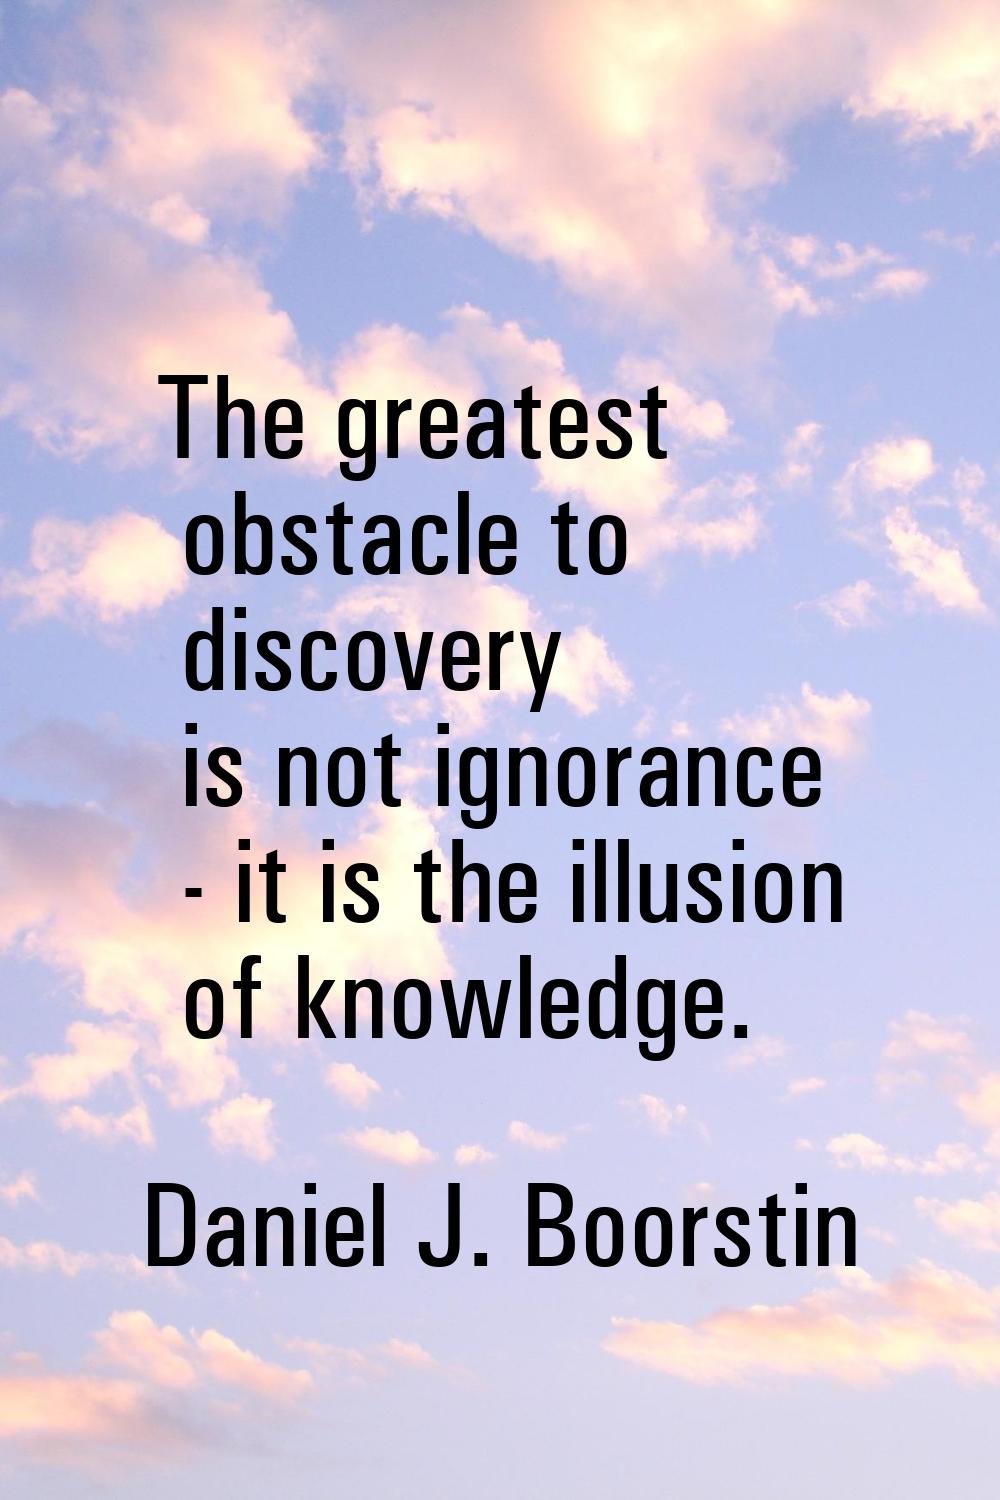 The greatest obstacle to discovery is not ignorance - it is the illusion of knowledge.